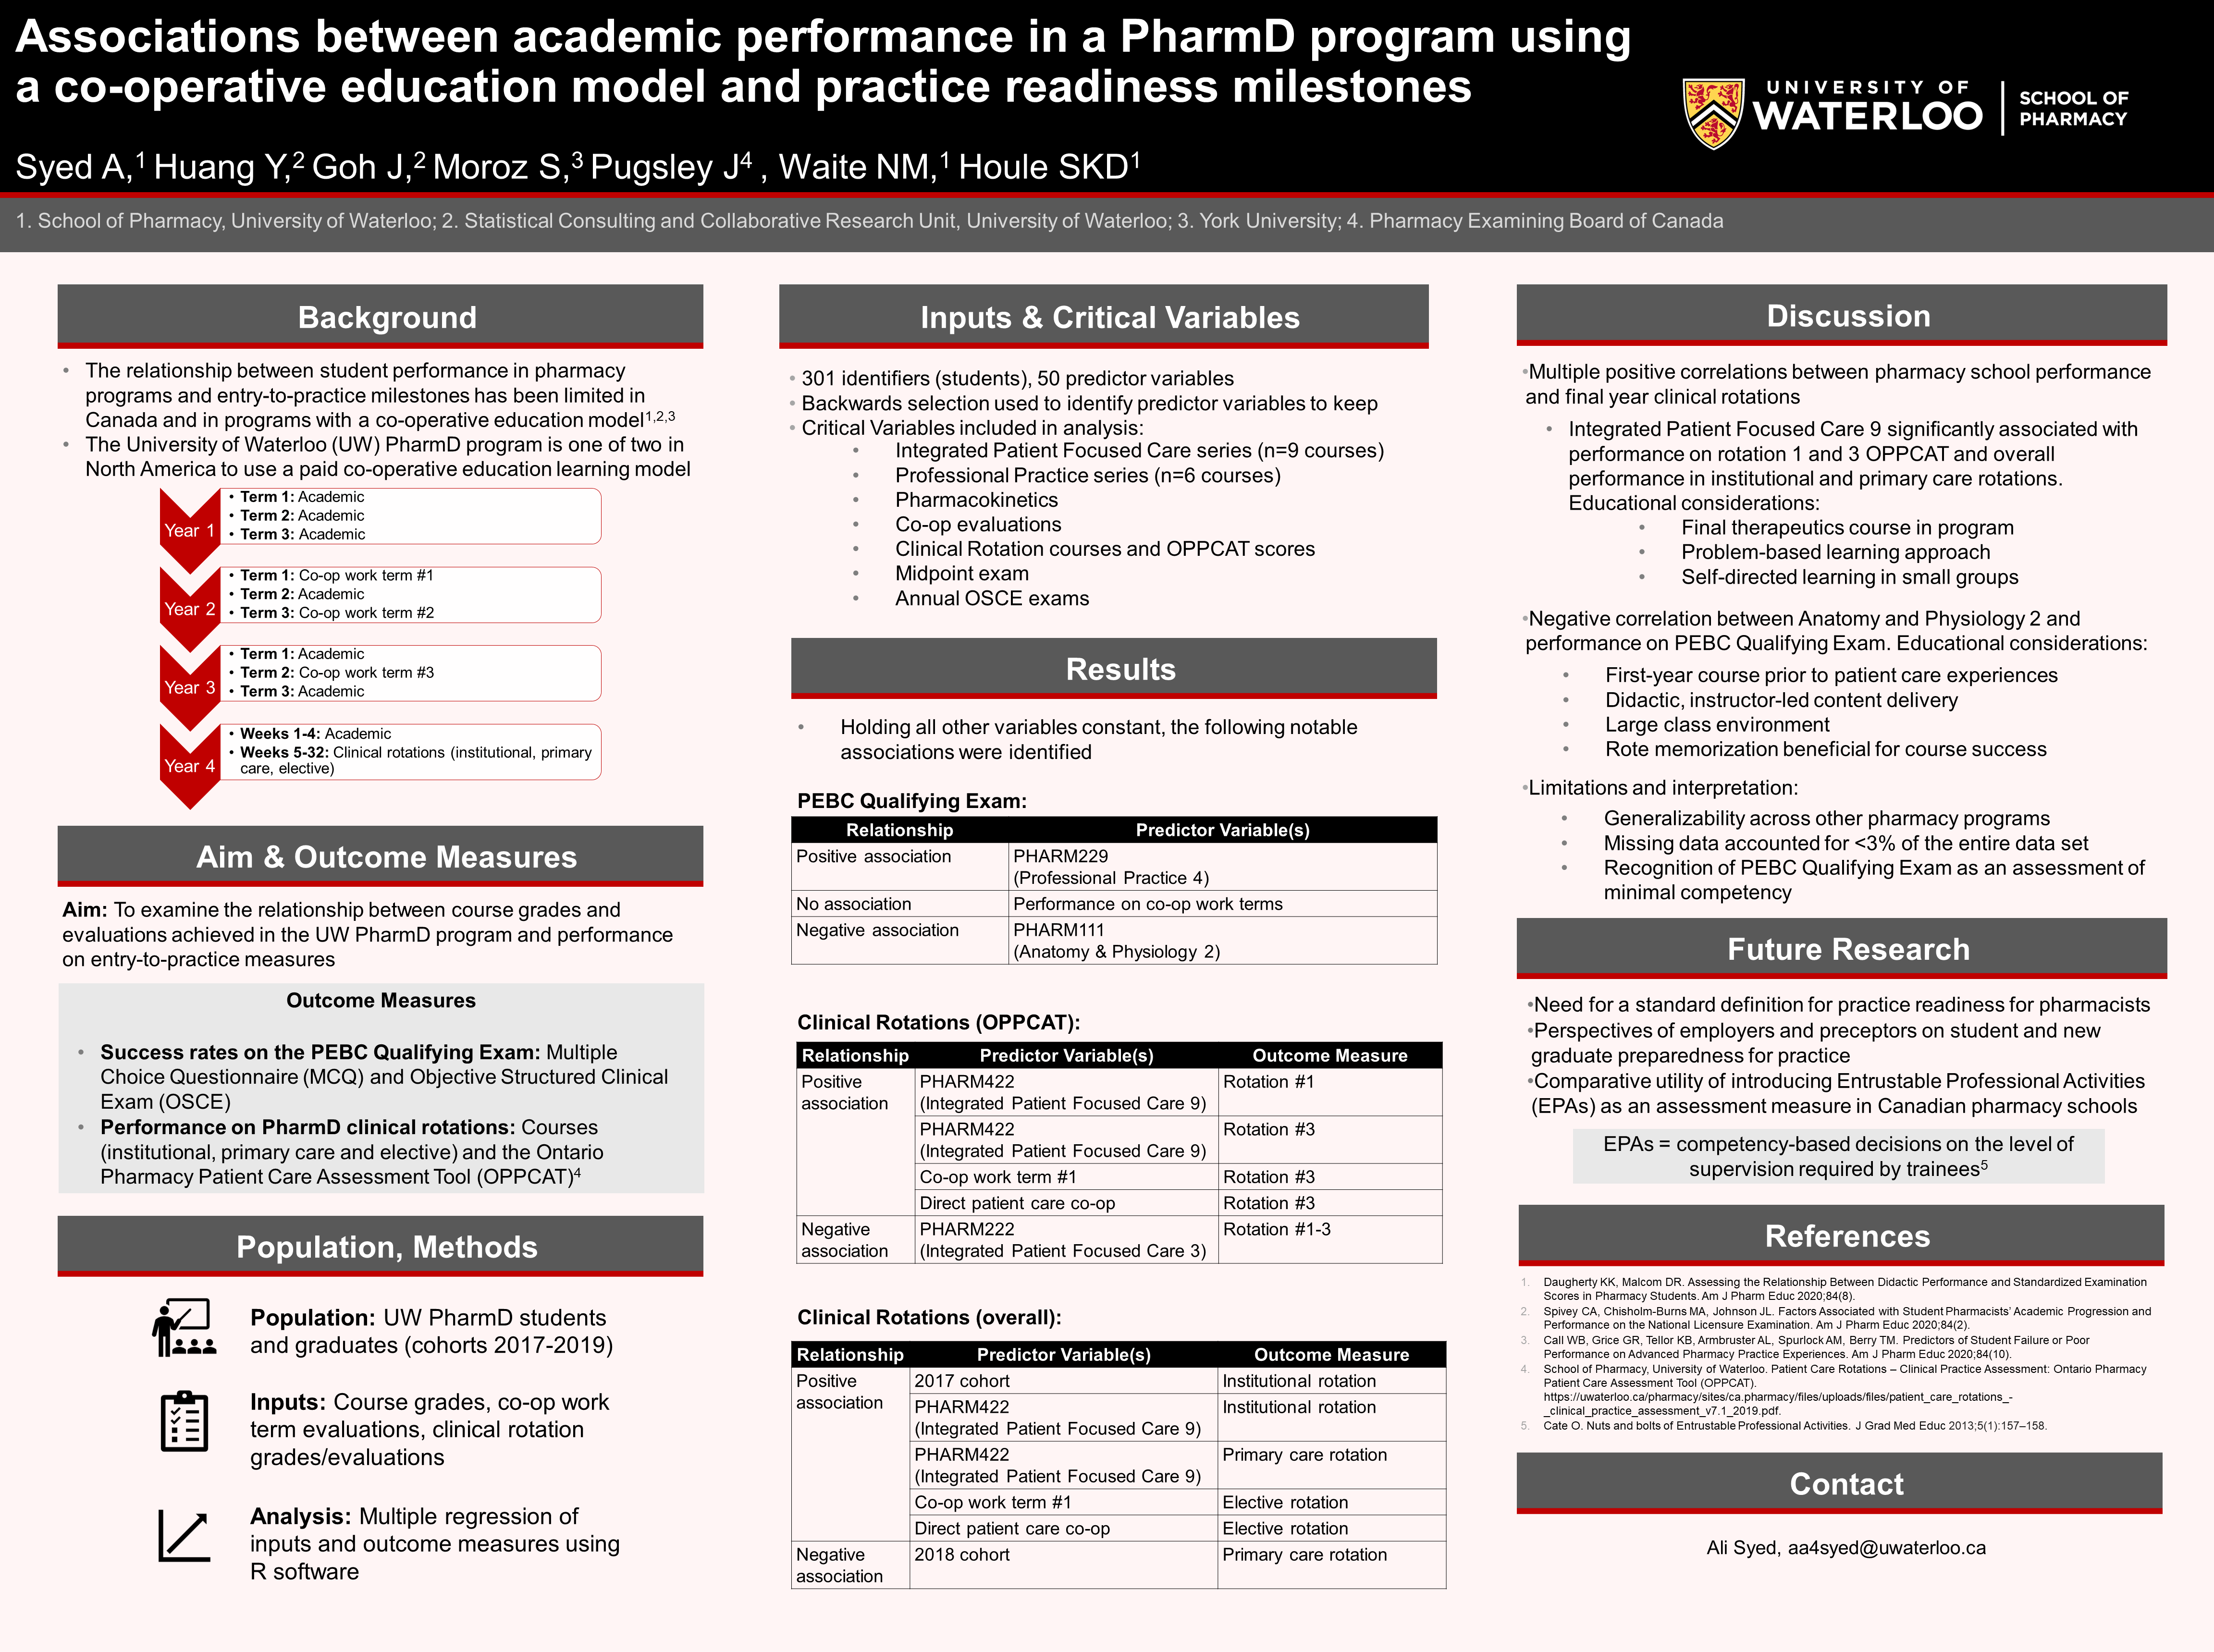 A poster depicting Associations between academic performance in a PharmD program using a co-operative education model and practice readiness milestones.